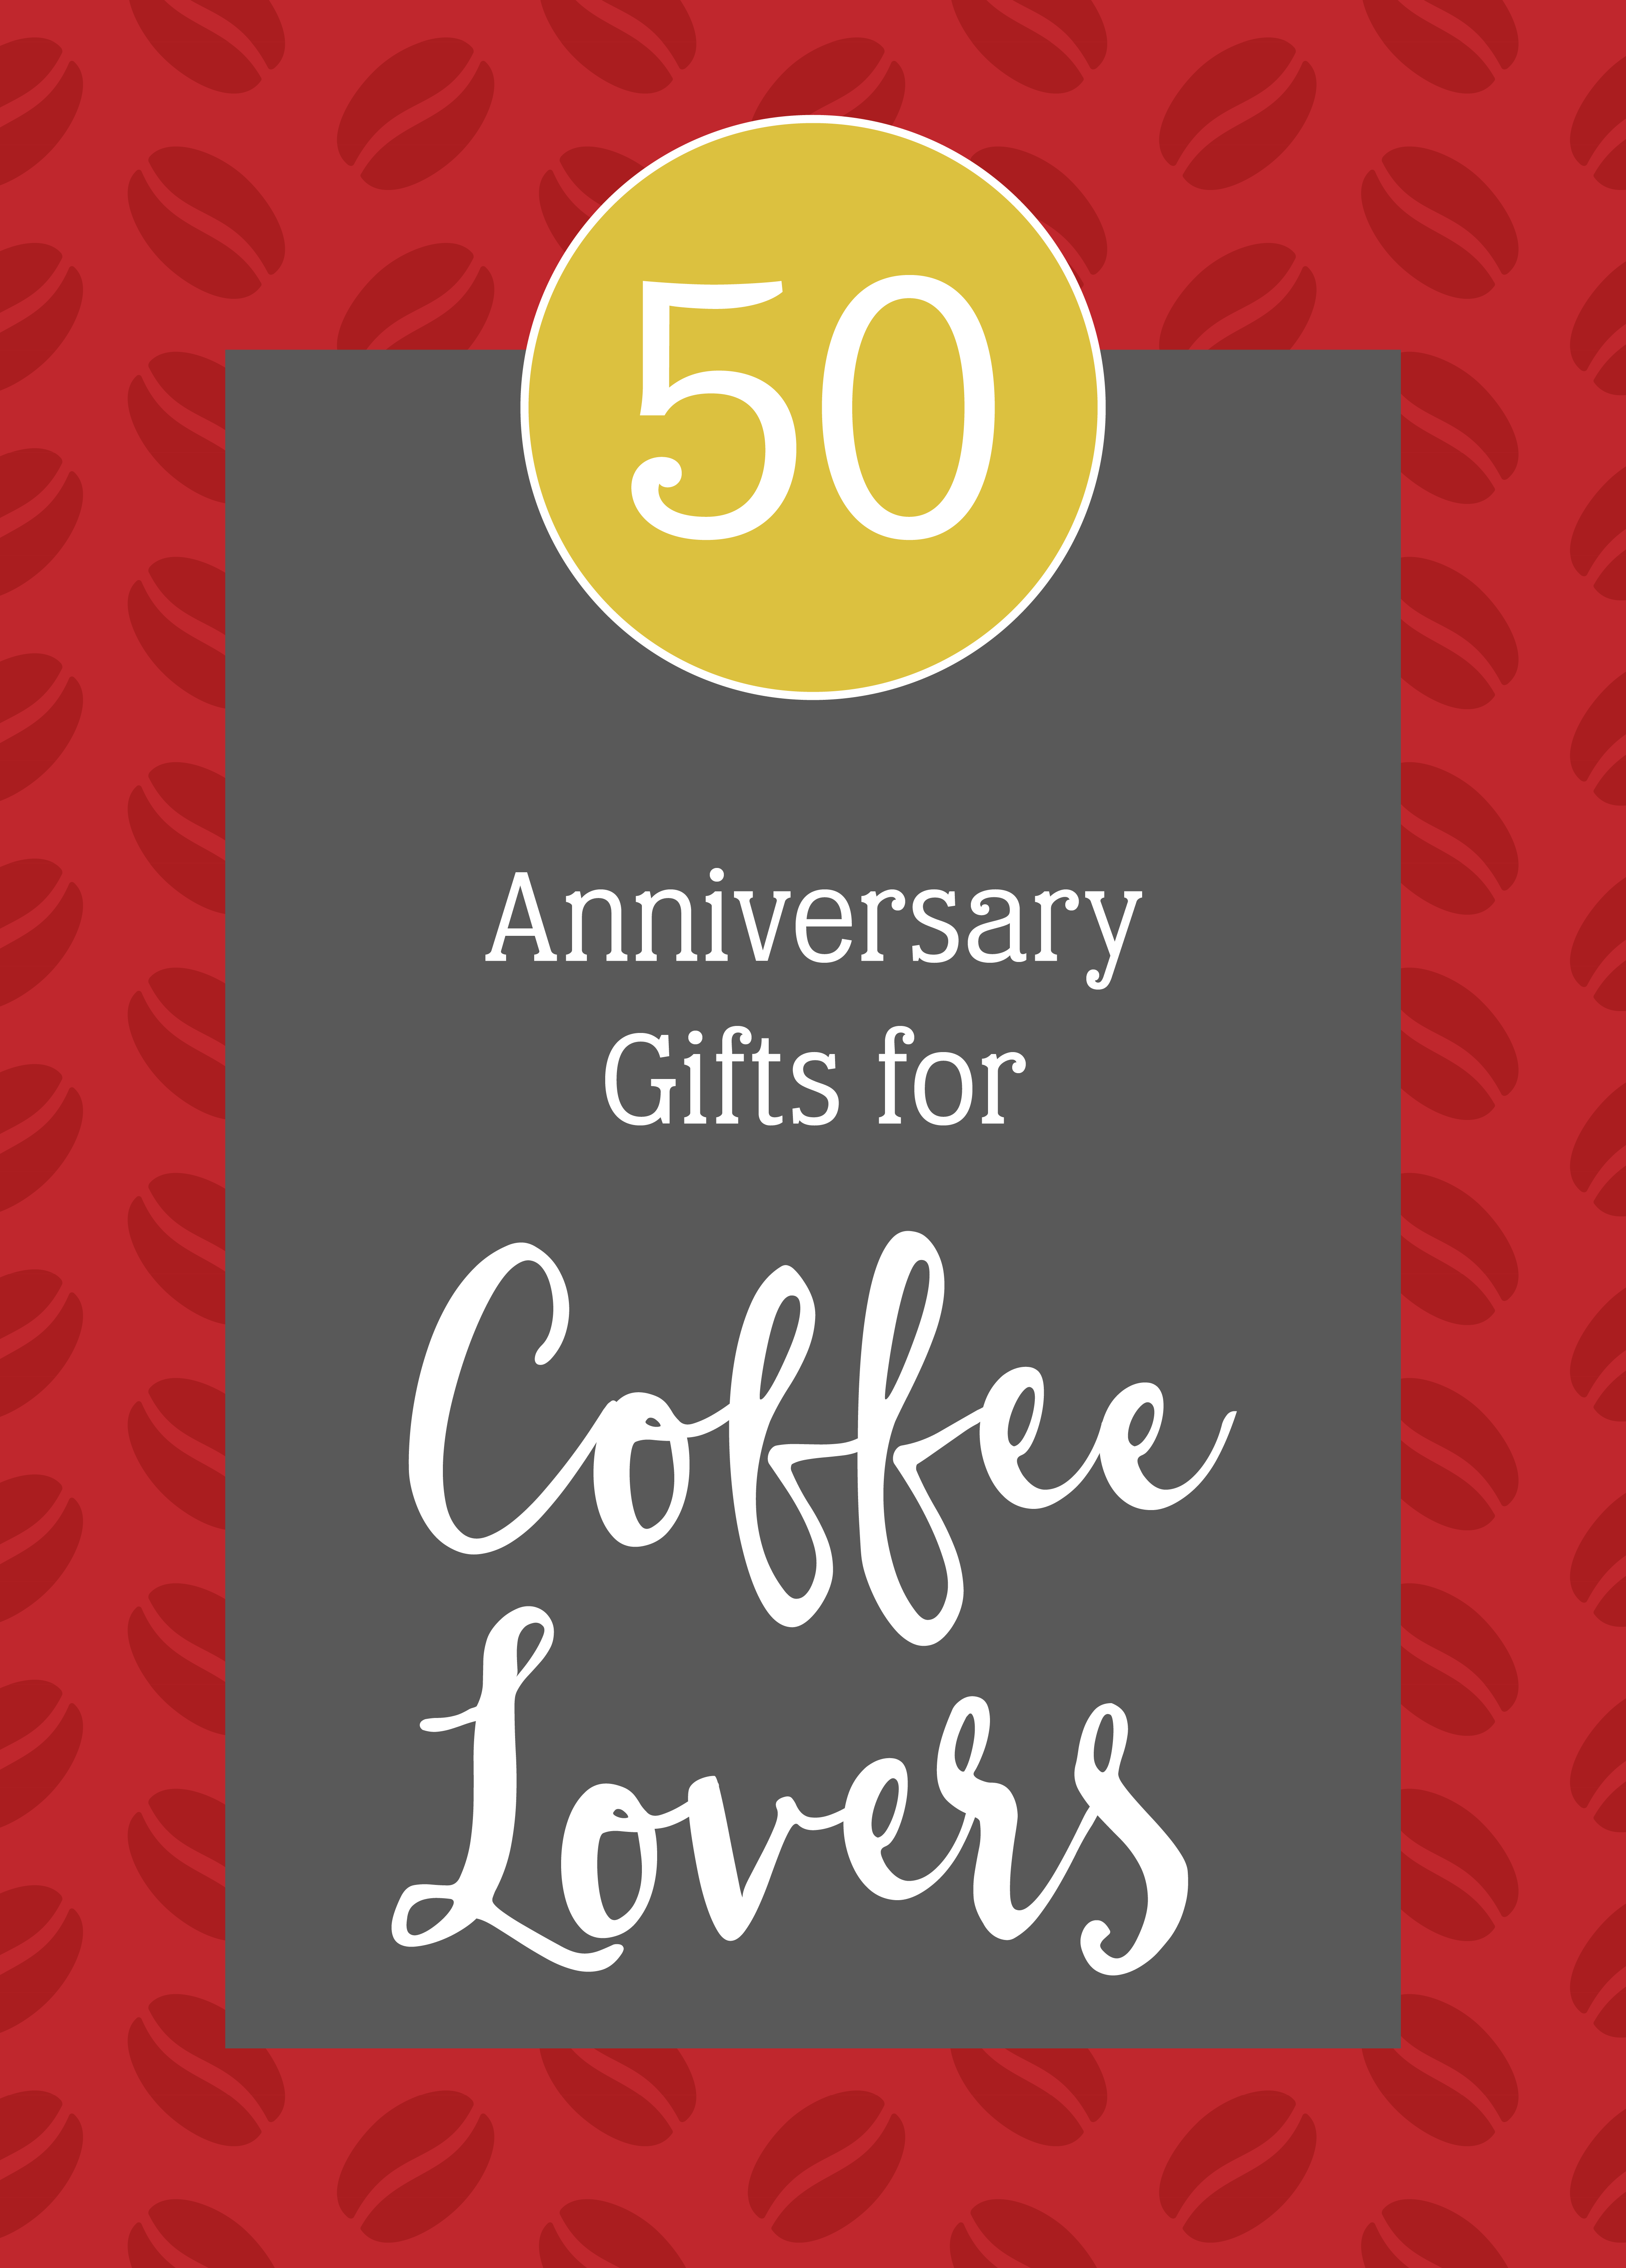 Graphic with a red bean pettern background and text that reas "50 Anniversary Gifts for Coffee Lovers"